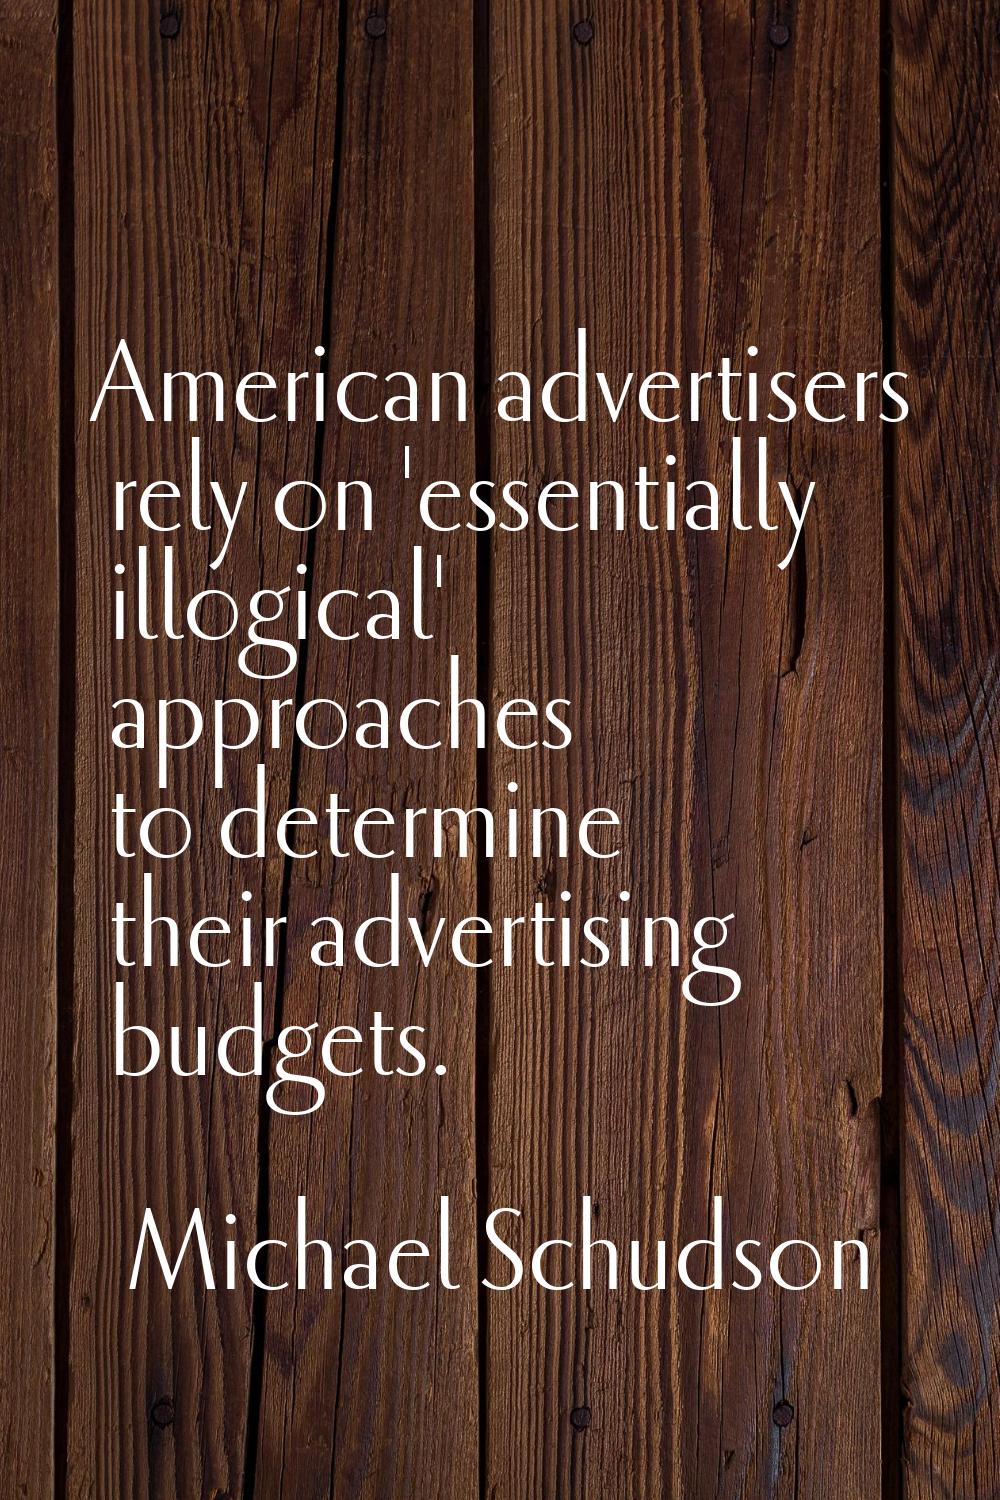 American advertisers rely on 'essentially illogical' approaches to determine their advertising budg